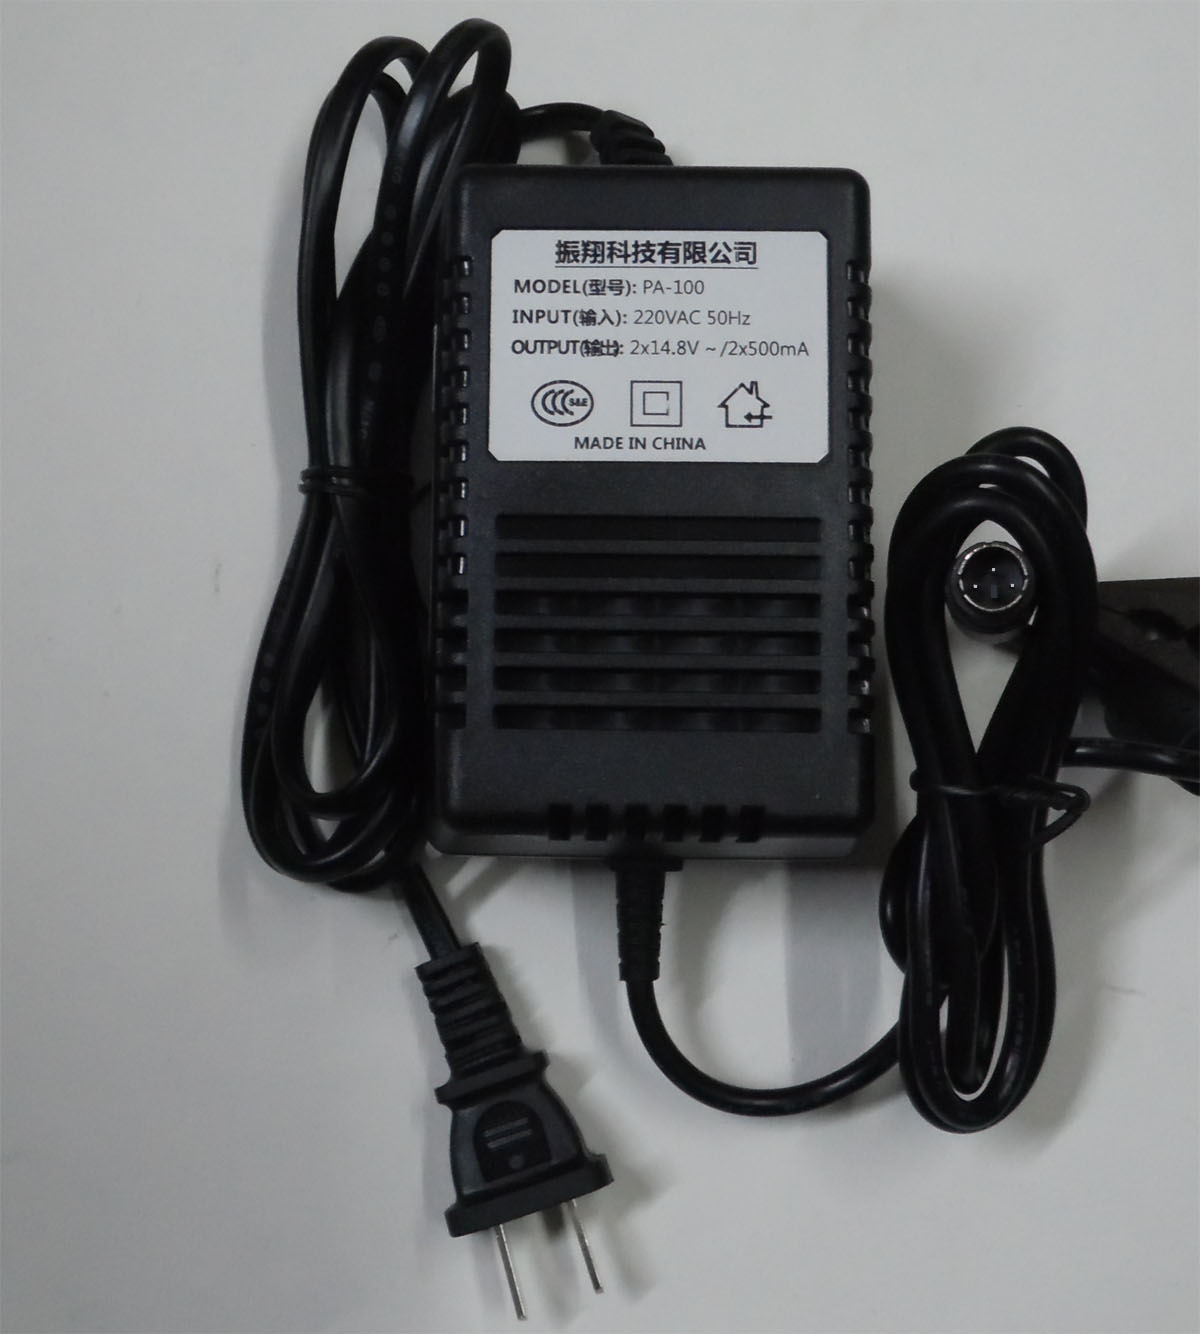 100% Brand New 220VAC 50Hz Behringer PA-100 XENYX1002FX 1202FX AC/DC POWER SUPPLY ADAPTER